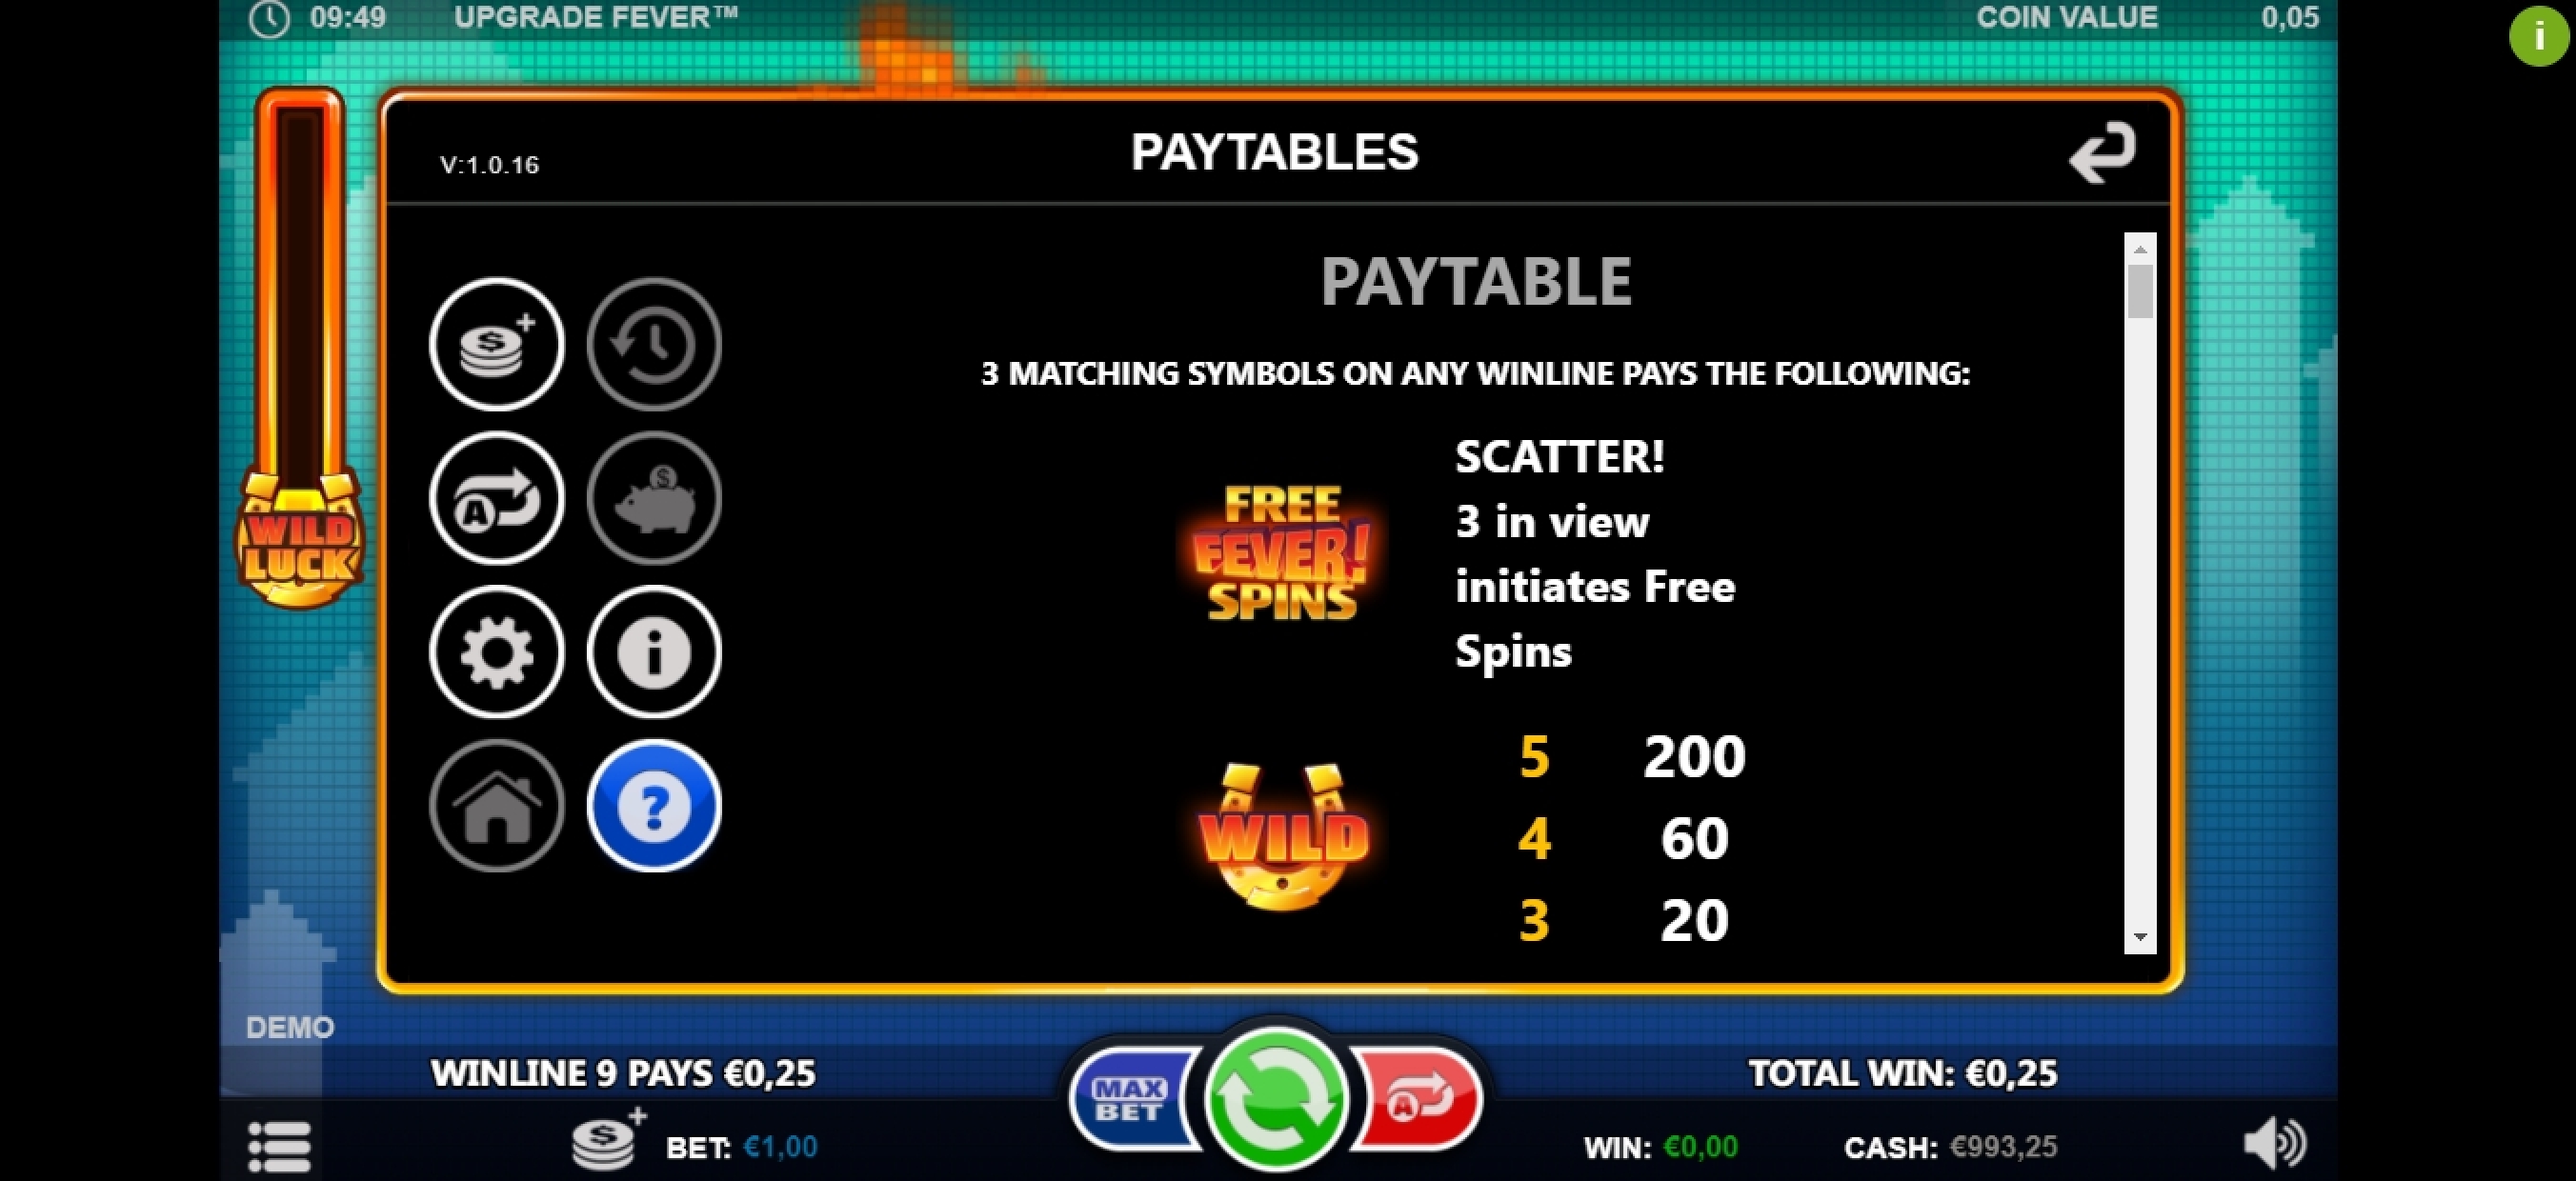 Info of Upgrade Fever Slot Game by Betsson Group